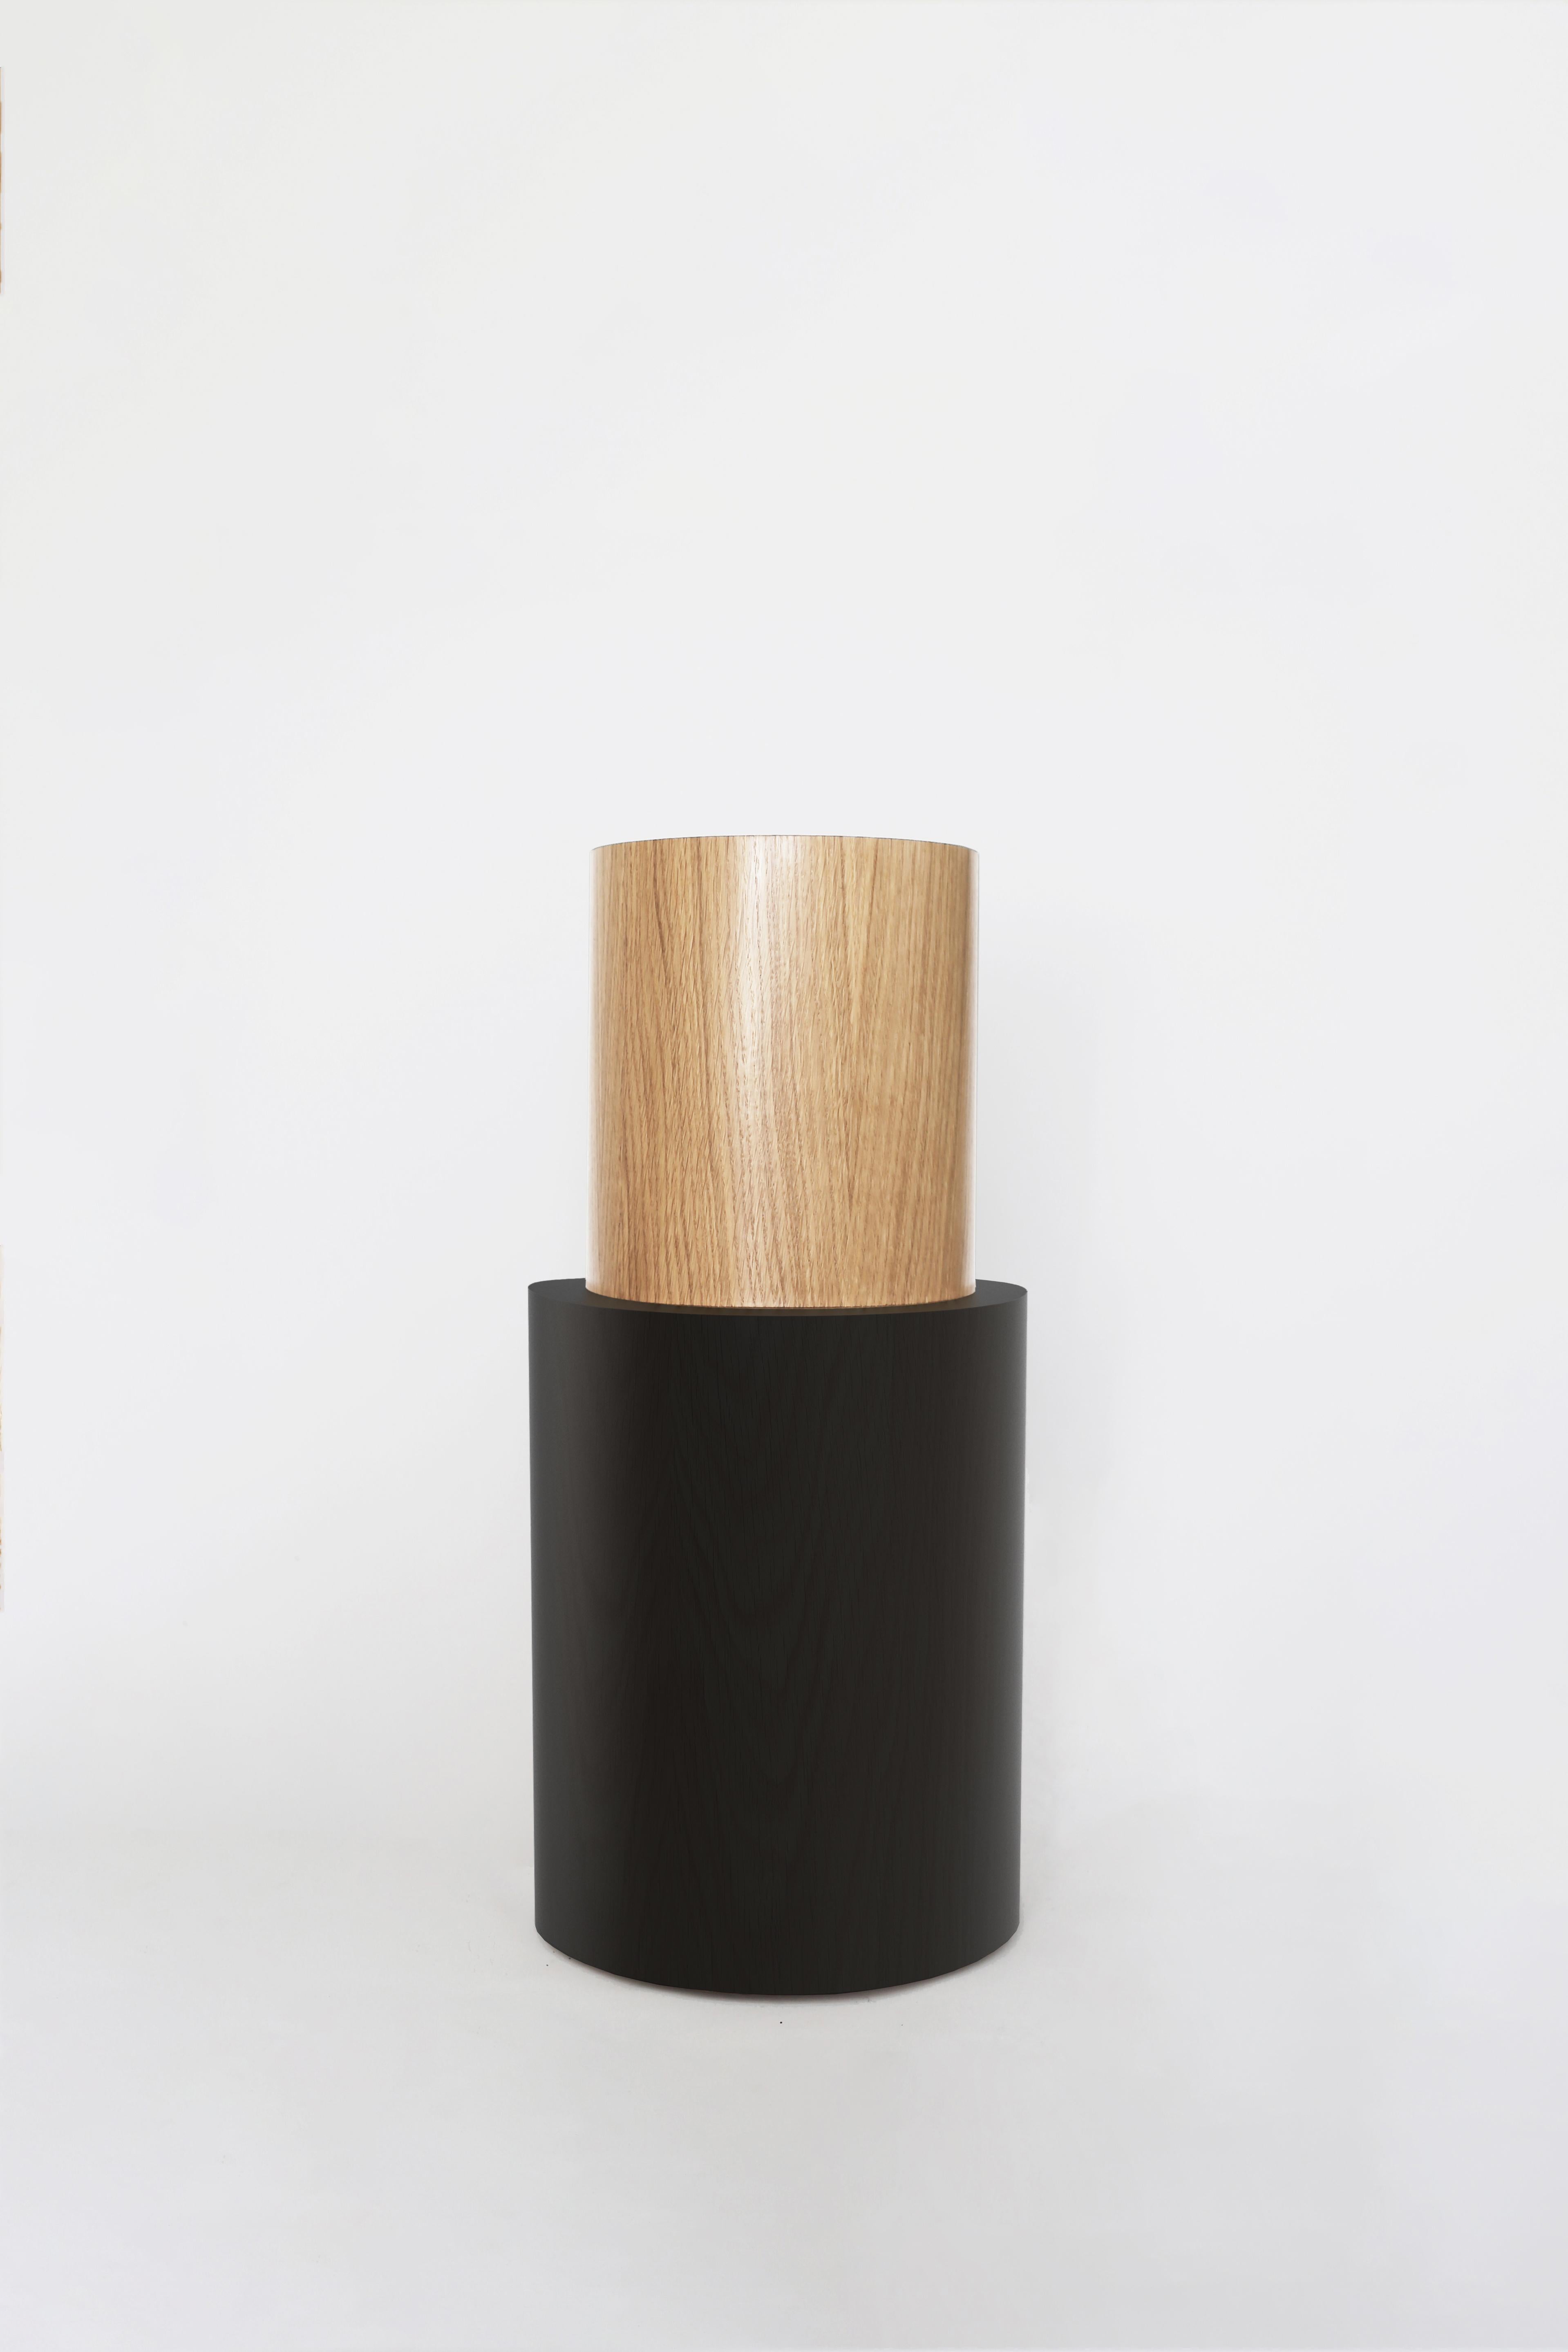 Orphan Work 100 Side Table
Shown in oak and black.
Available in natural oak with painted base.
Measures: 10” diameter x 22” height

Orphan work is designed to complement in the heart of Soho, New York City. Each piece is handmade in New York and Los